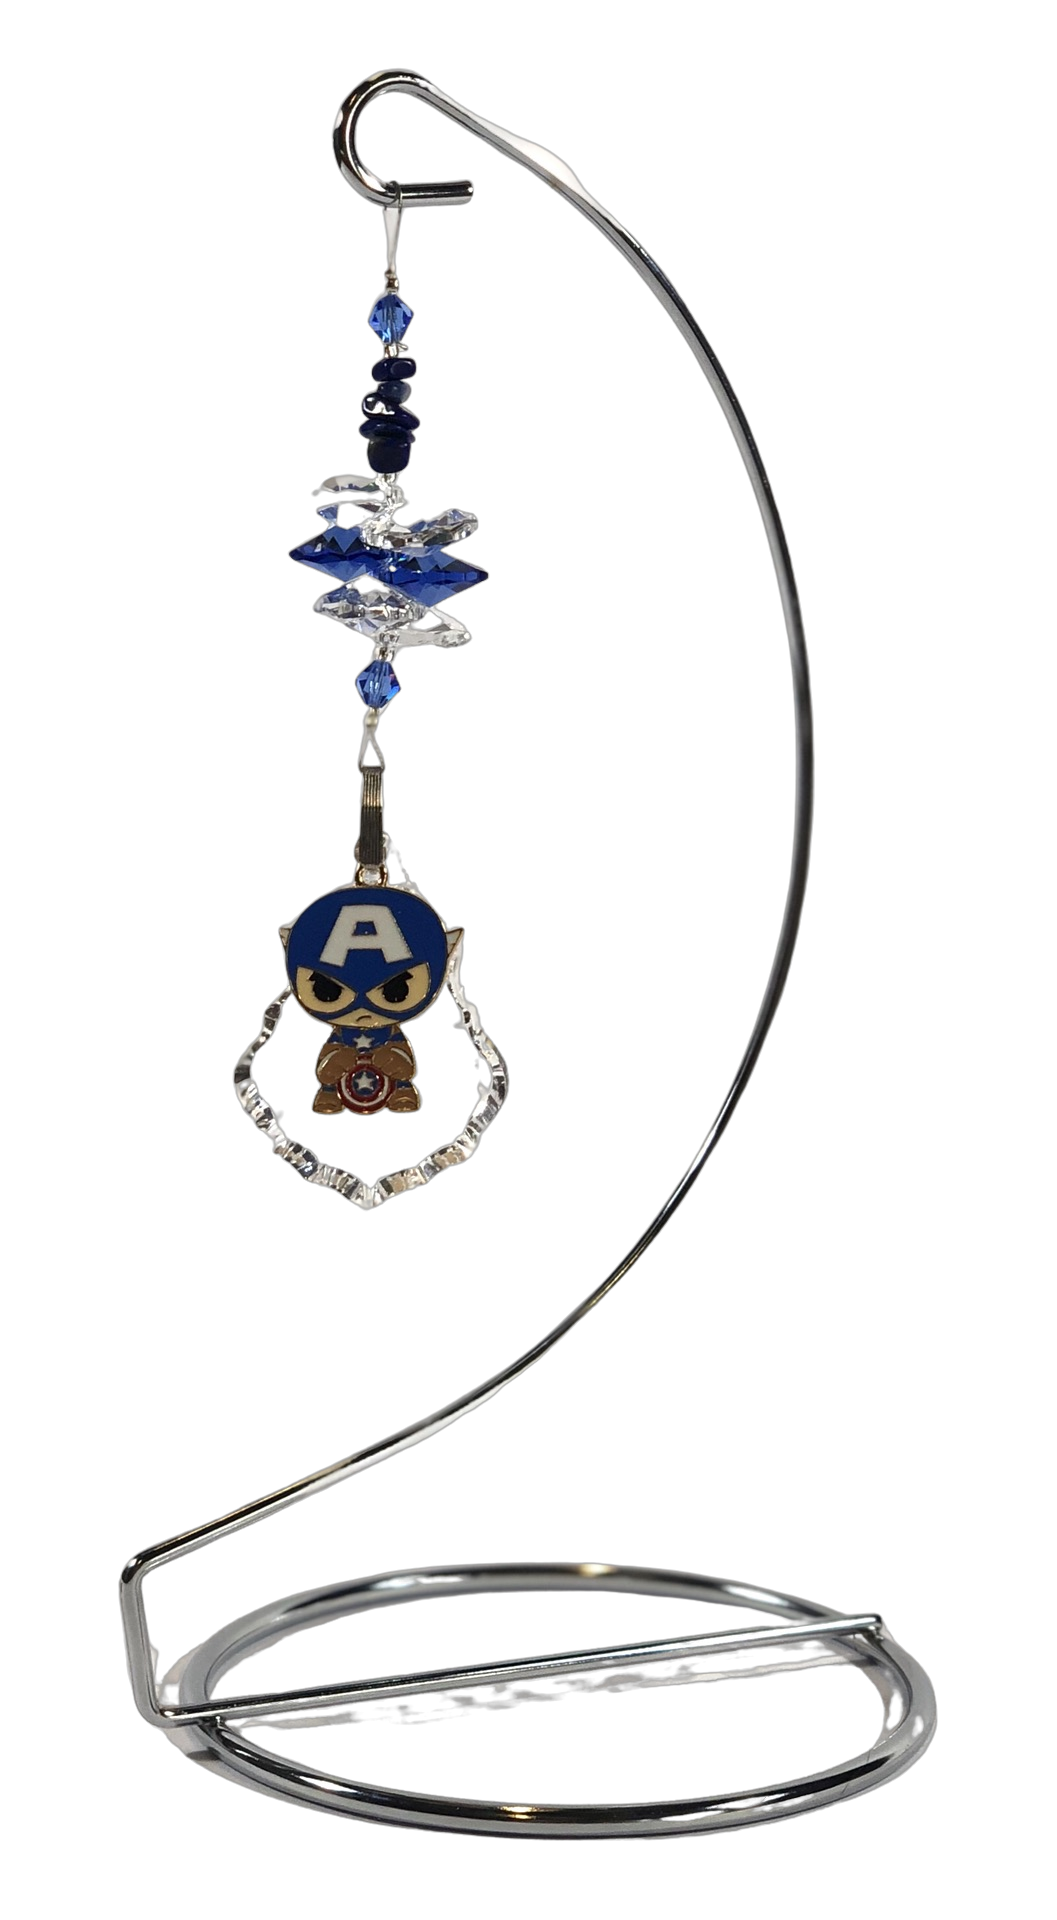 Captain America - Marvel crystal suncatcher is decorated with lapis lazuli gemstones and come on this amazing stand.